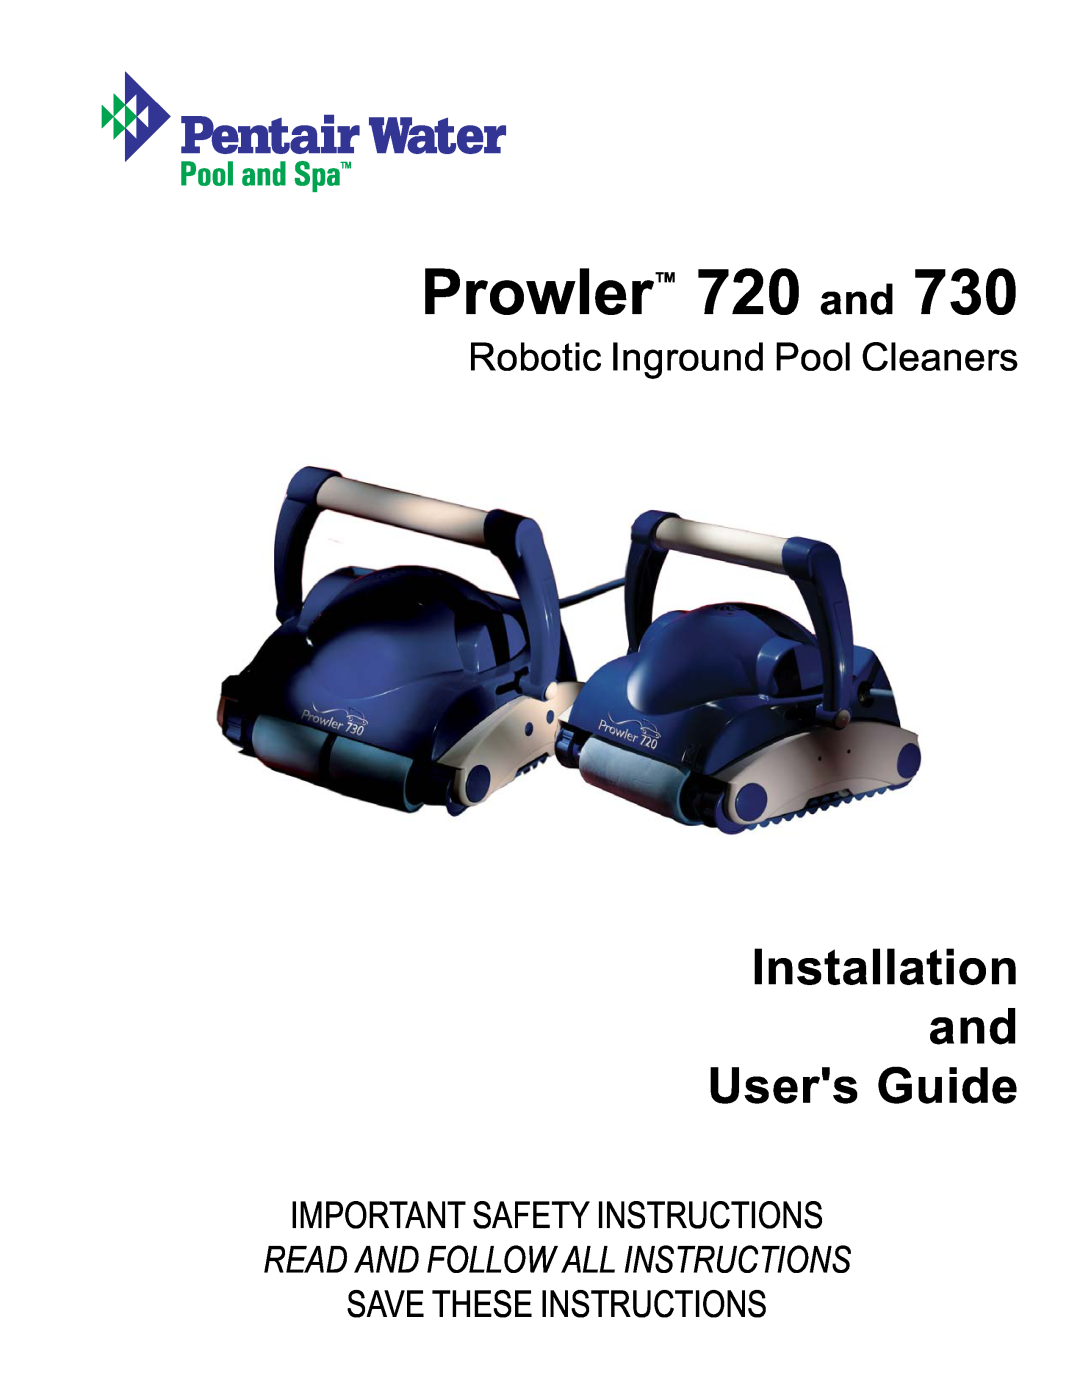 Pentair important safety instructions Prowler 720 and, Installation and Users Guide, Robotic Inground Pool Cleaners 